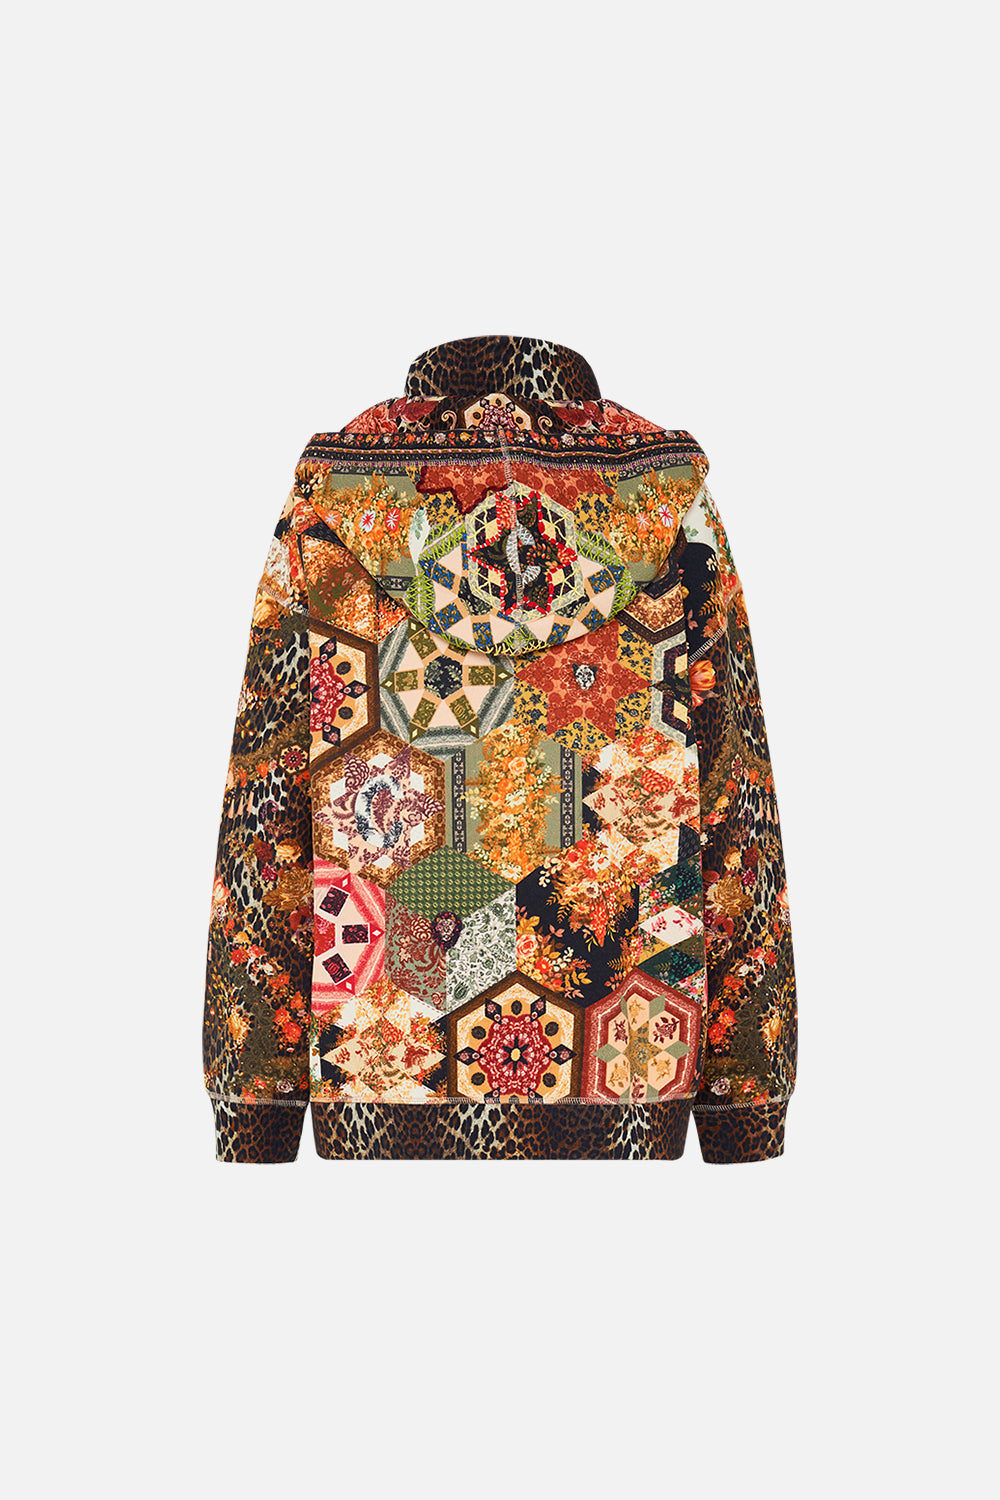 CAMILLA floral half-zip hoodie with pocket flap in Stitched In Time print.